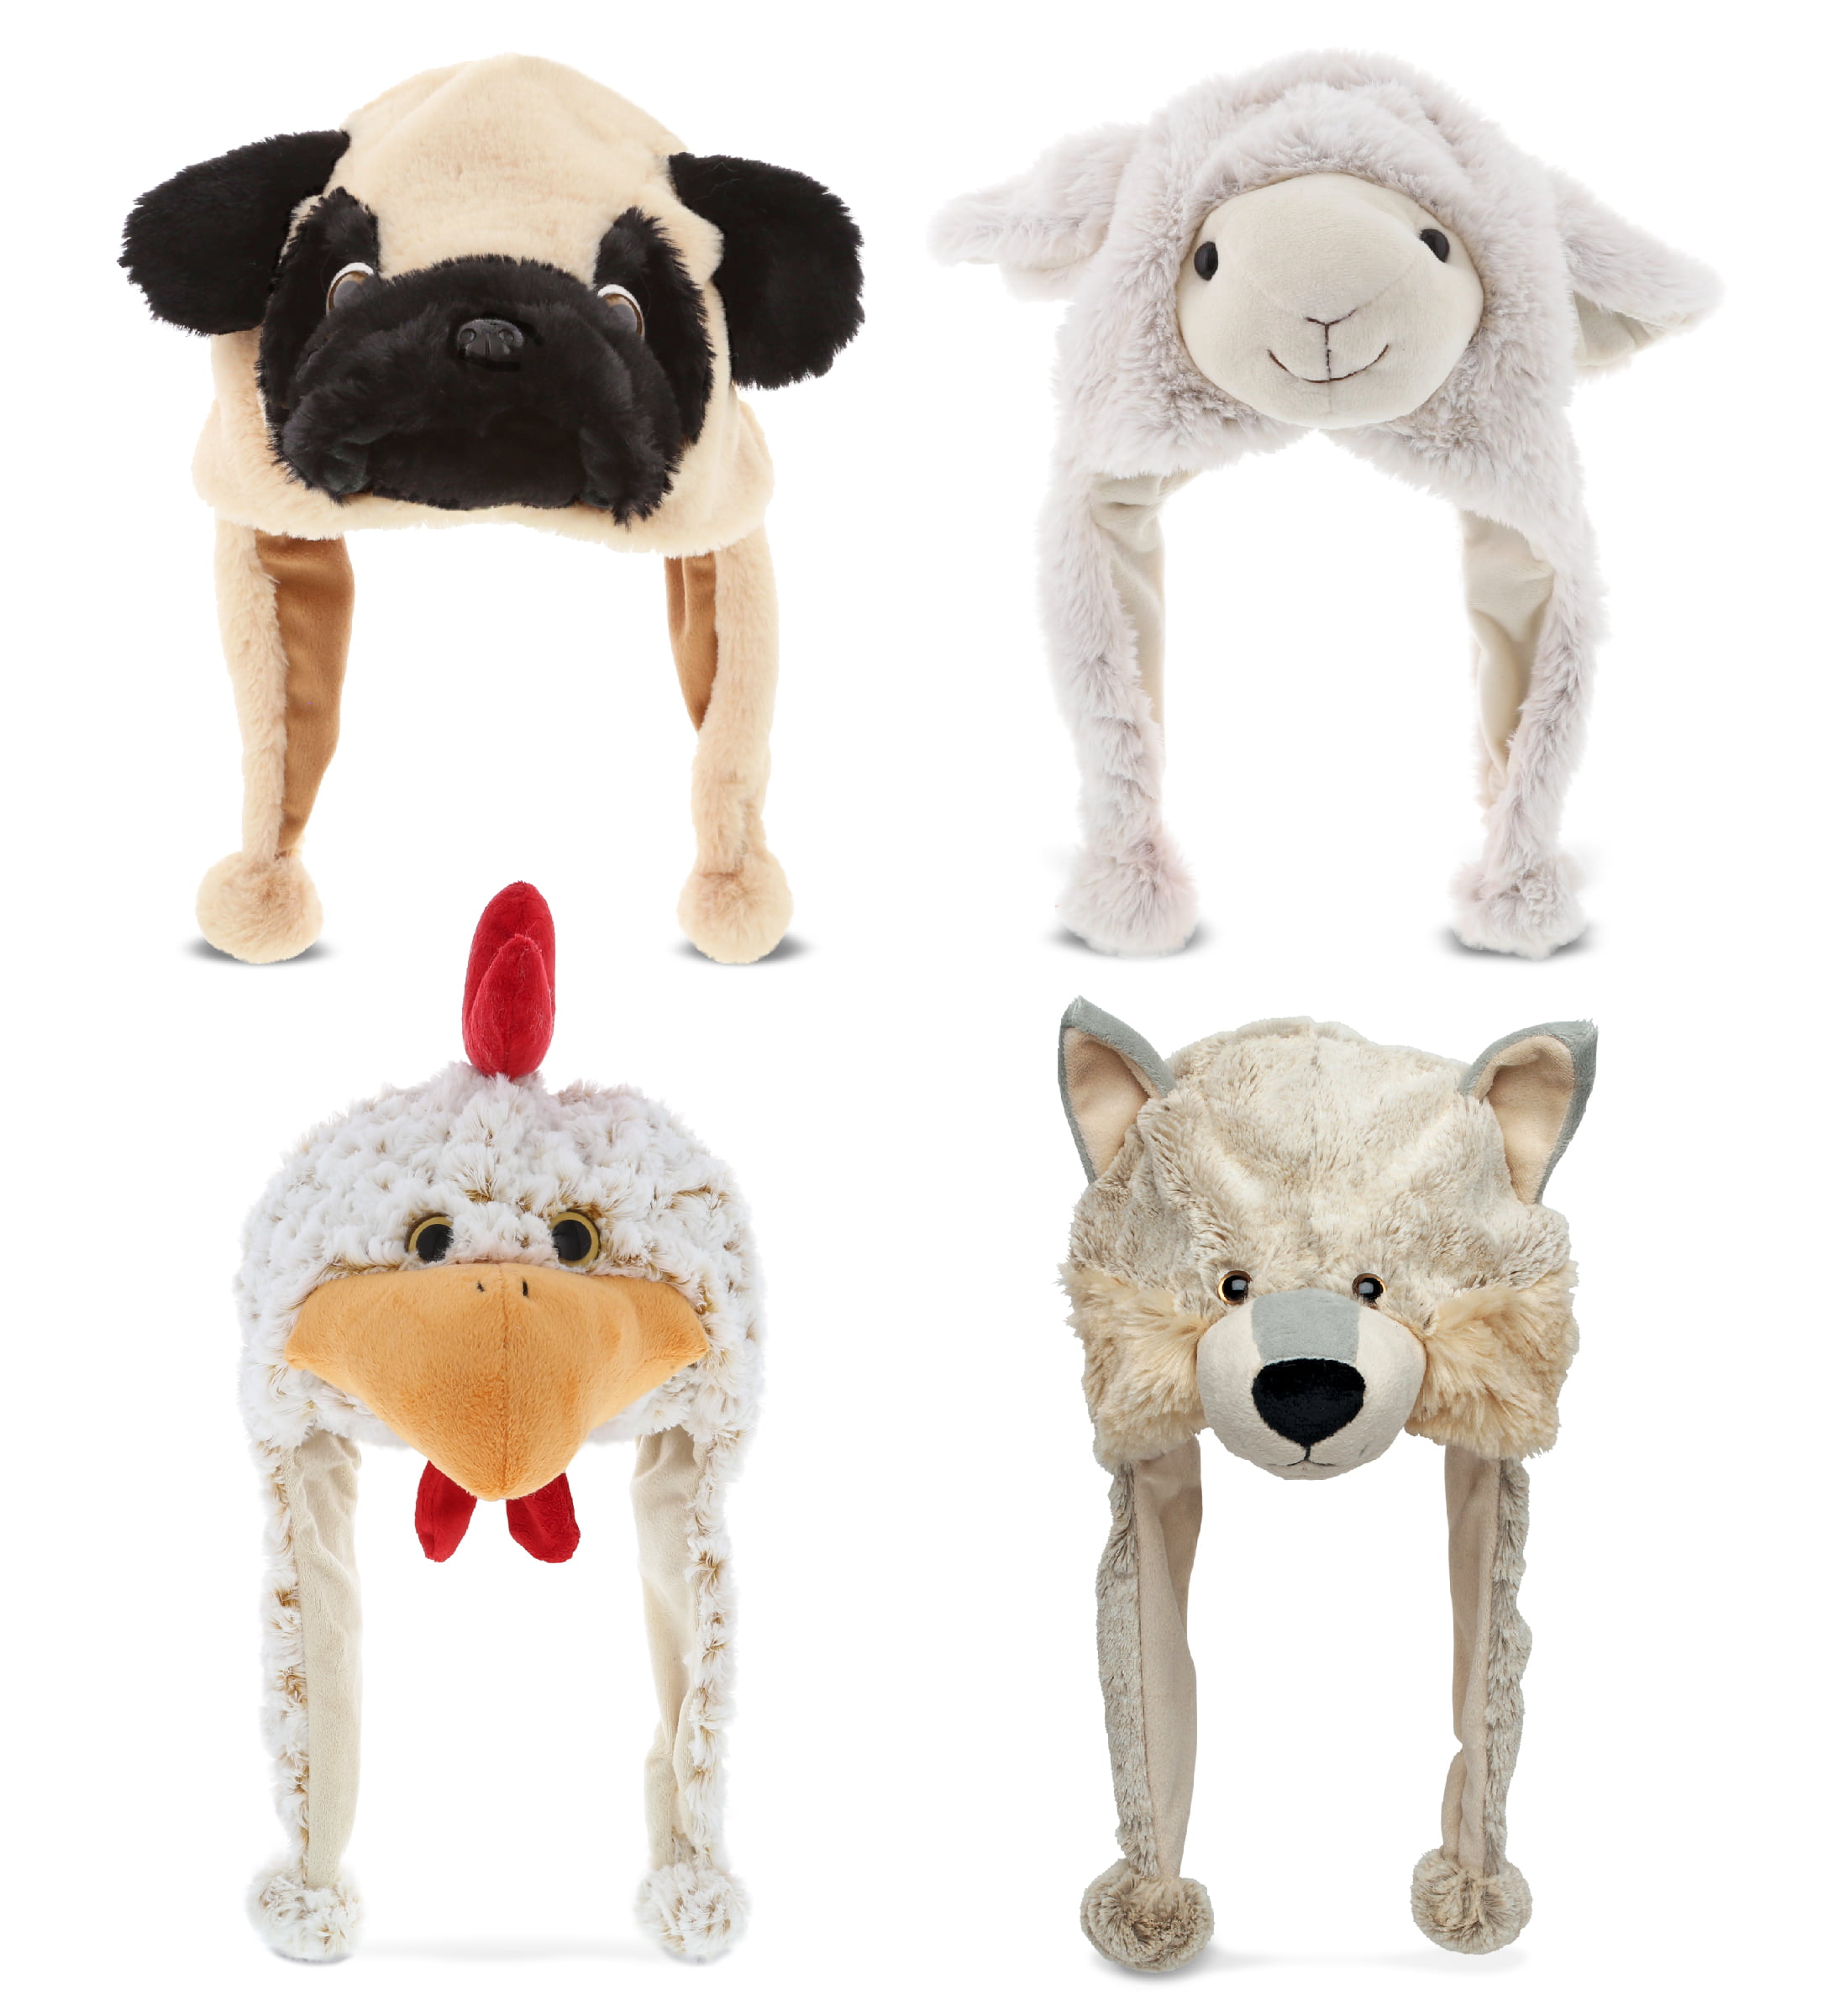 DolliBu Farm Plush Hats Set of 4 – Super Soft Wolf, Sheep, Pug Dog, Rooster  Warm Hat with Ear Flaps, Plush Party Crazy Hat, Stuffed Animal Halloween  Costume Toy Hats, Cozy Fleece